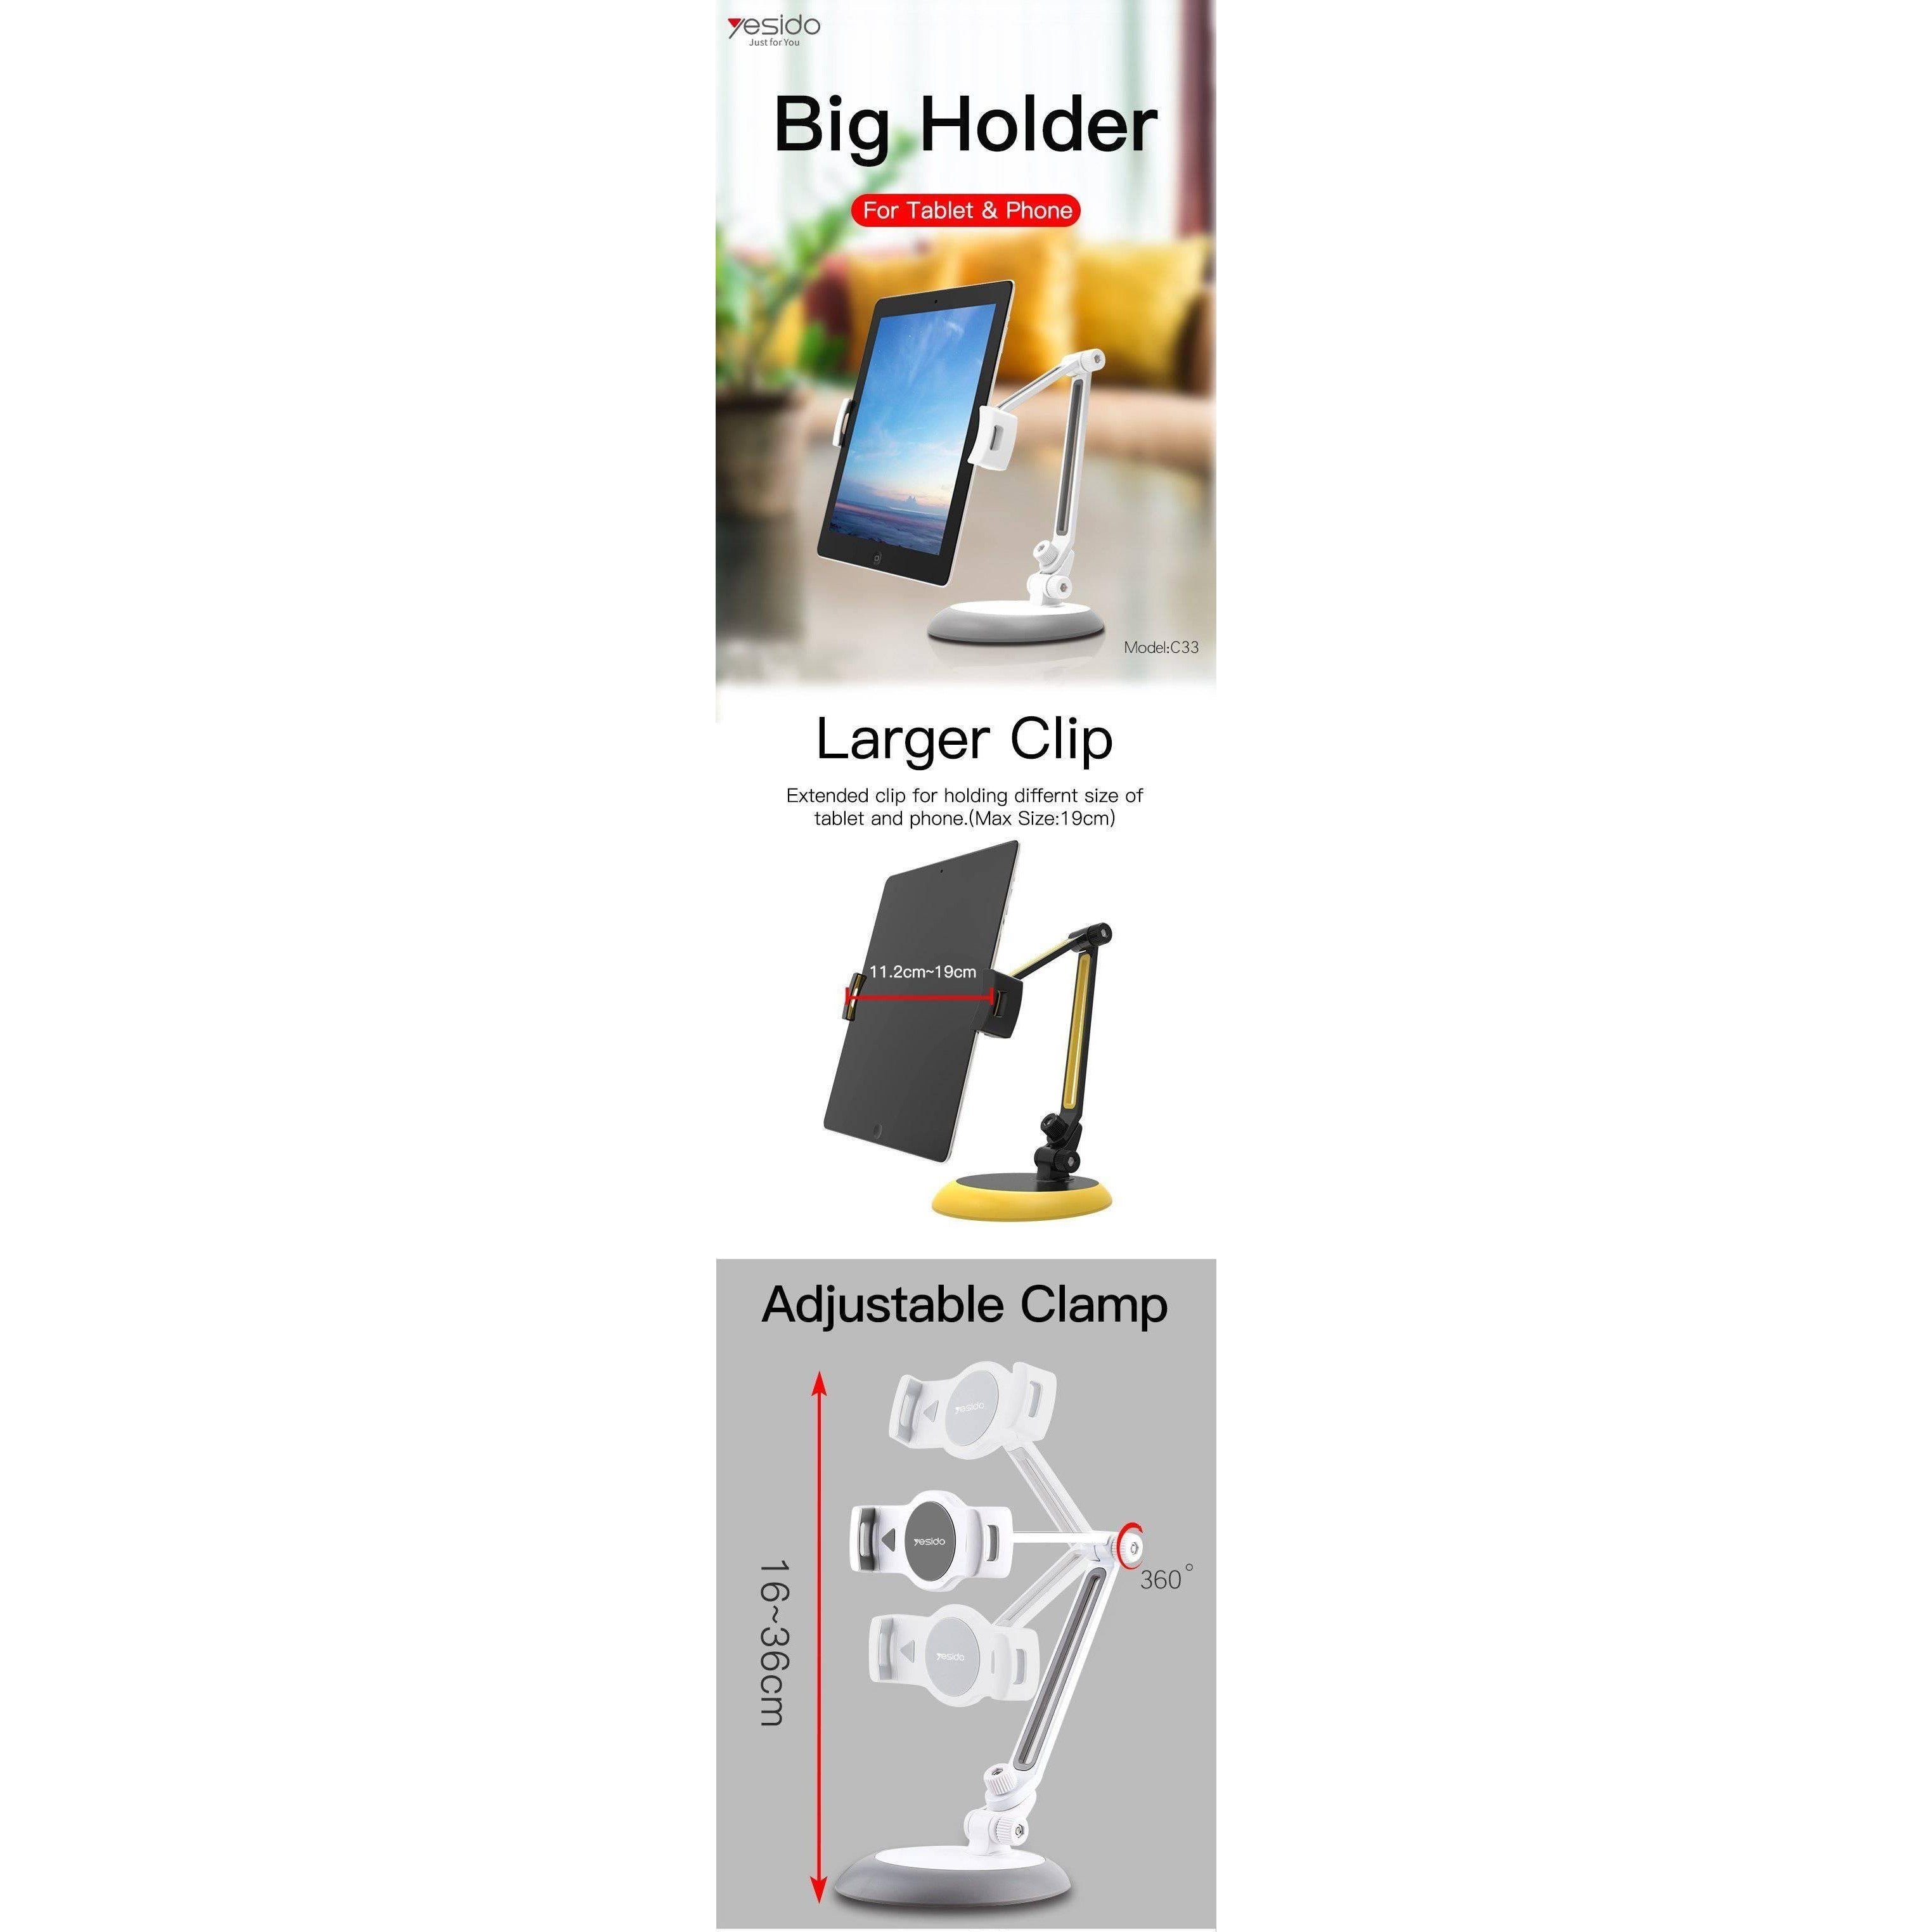 Portable Table IPad Stand For Mobiles And Tablets UpTo 11 Inch | Shopna Online Store .